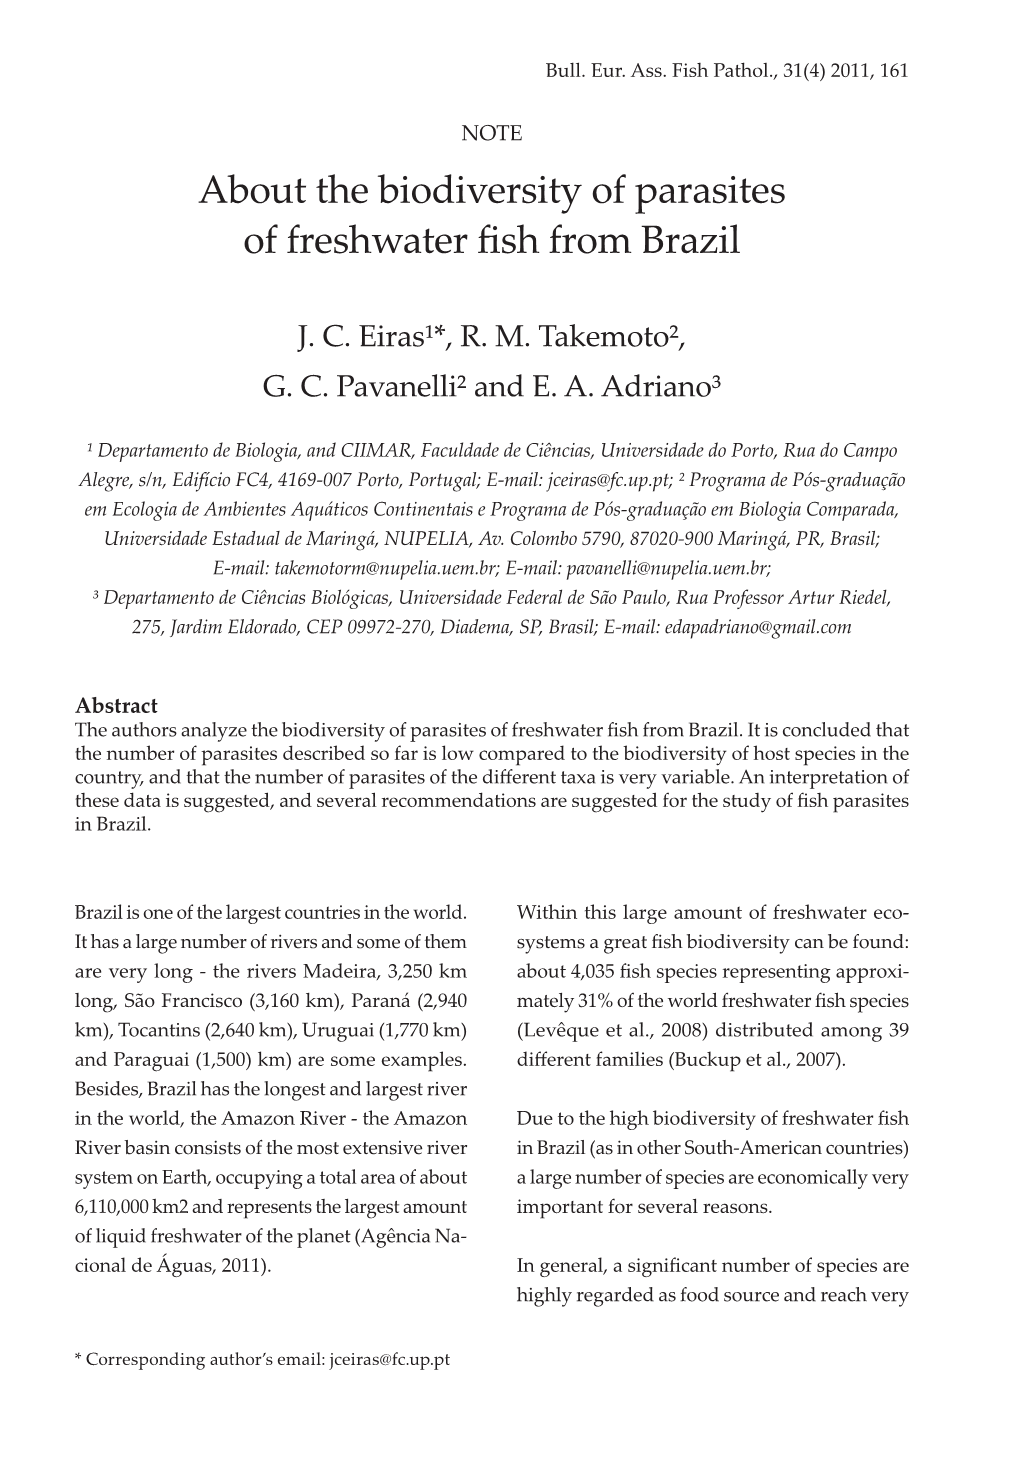 About the Biodiversity of Parasites of Freshwater Fish from Brazil